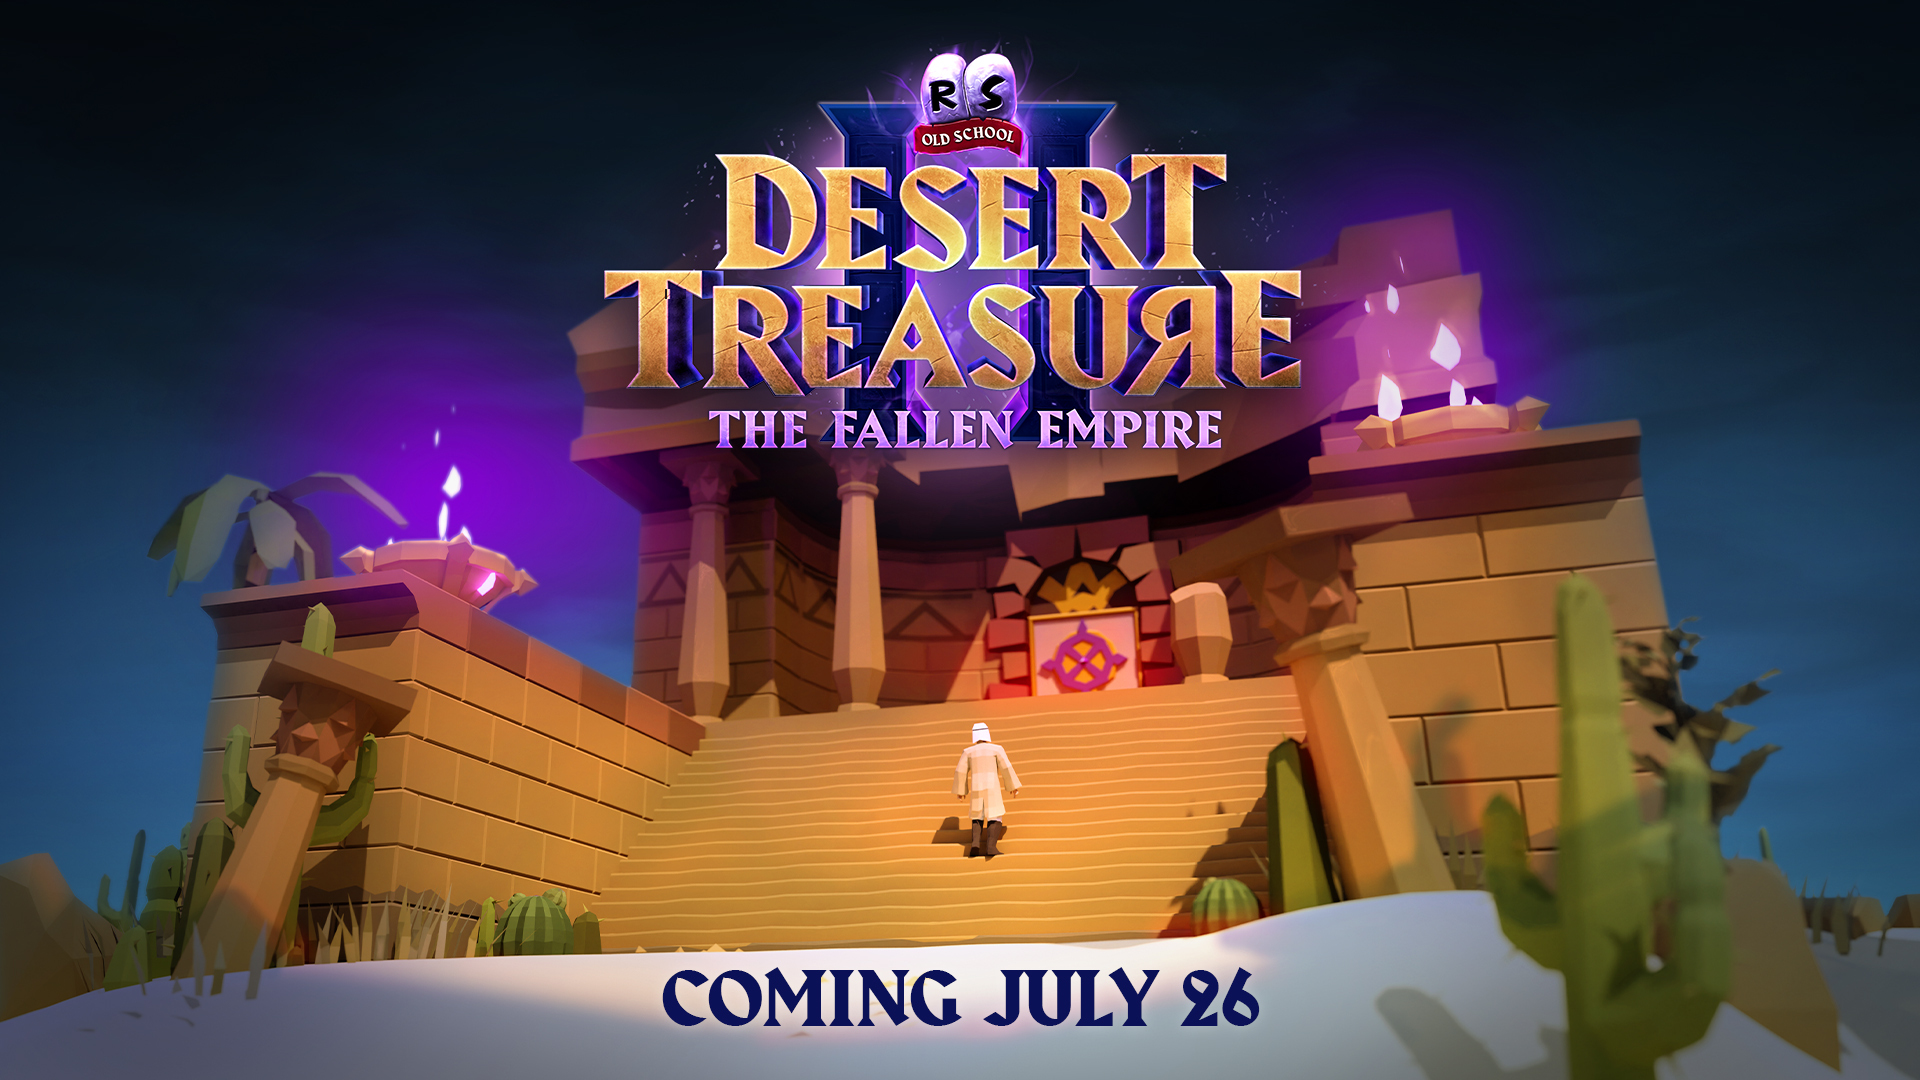 Old School RuneScape Quest ‘Desert Treasure’ Gets Thrilling Sequel 20 Years in the Making